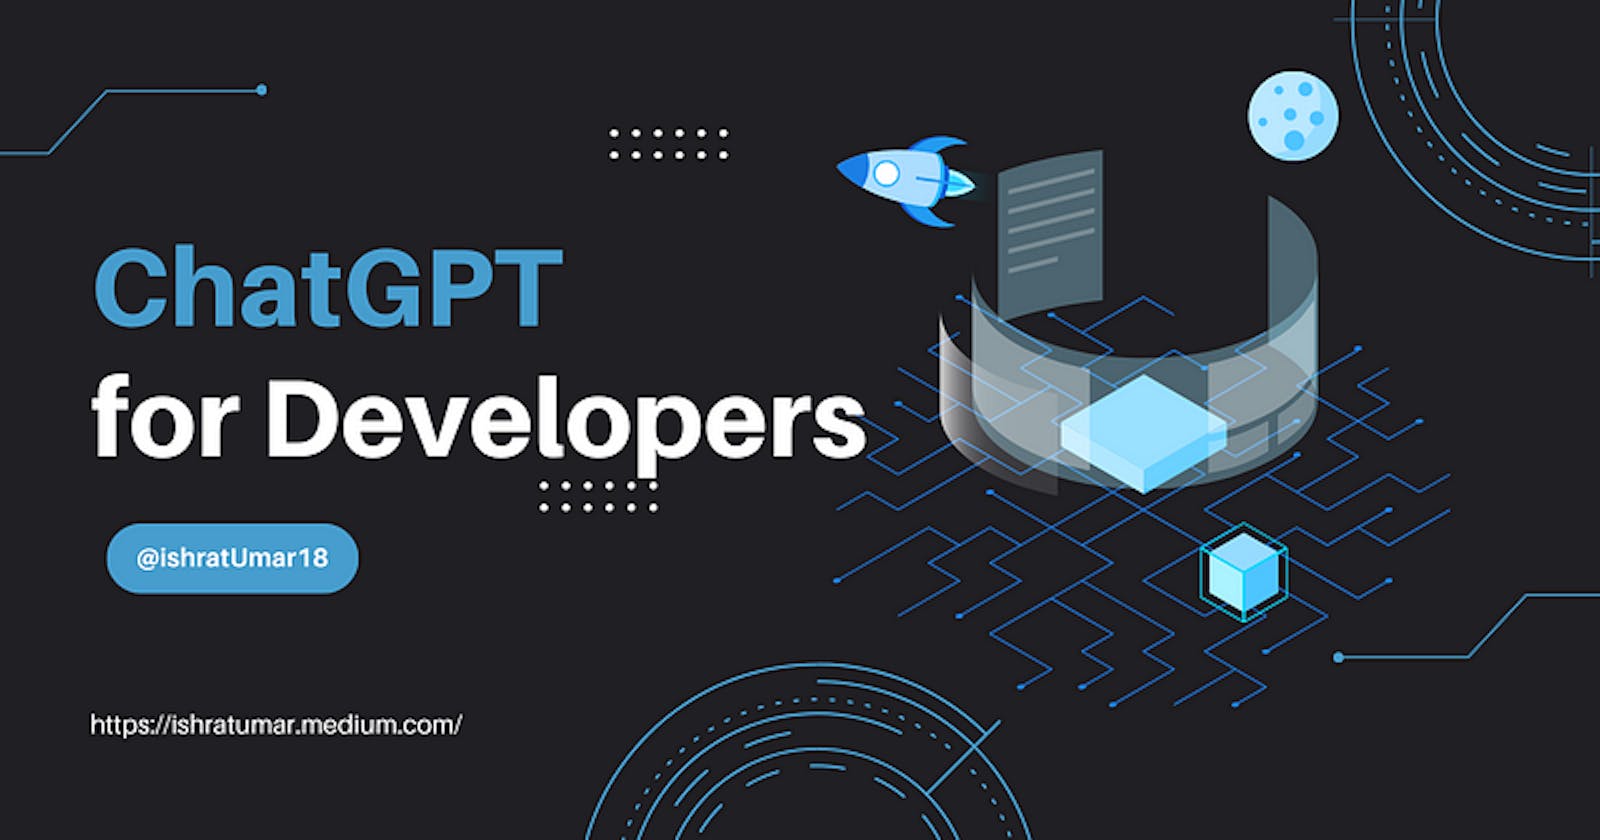 Maximize your development potential with ChatGPT